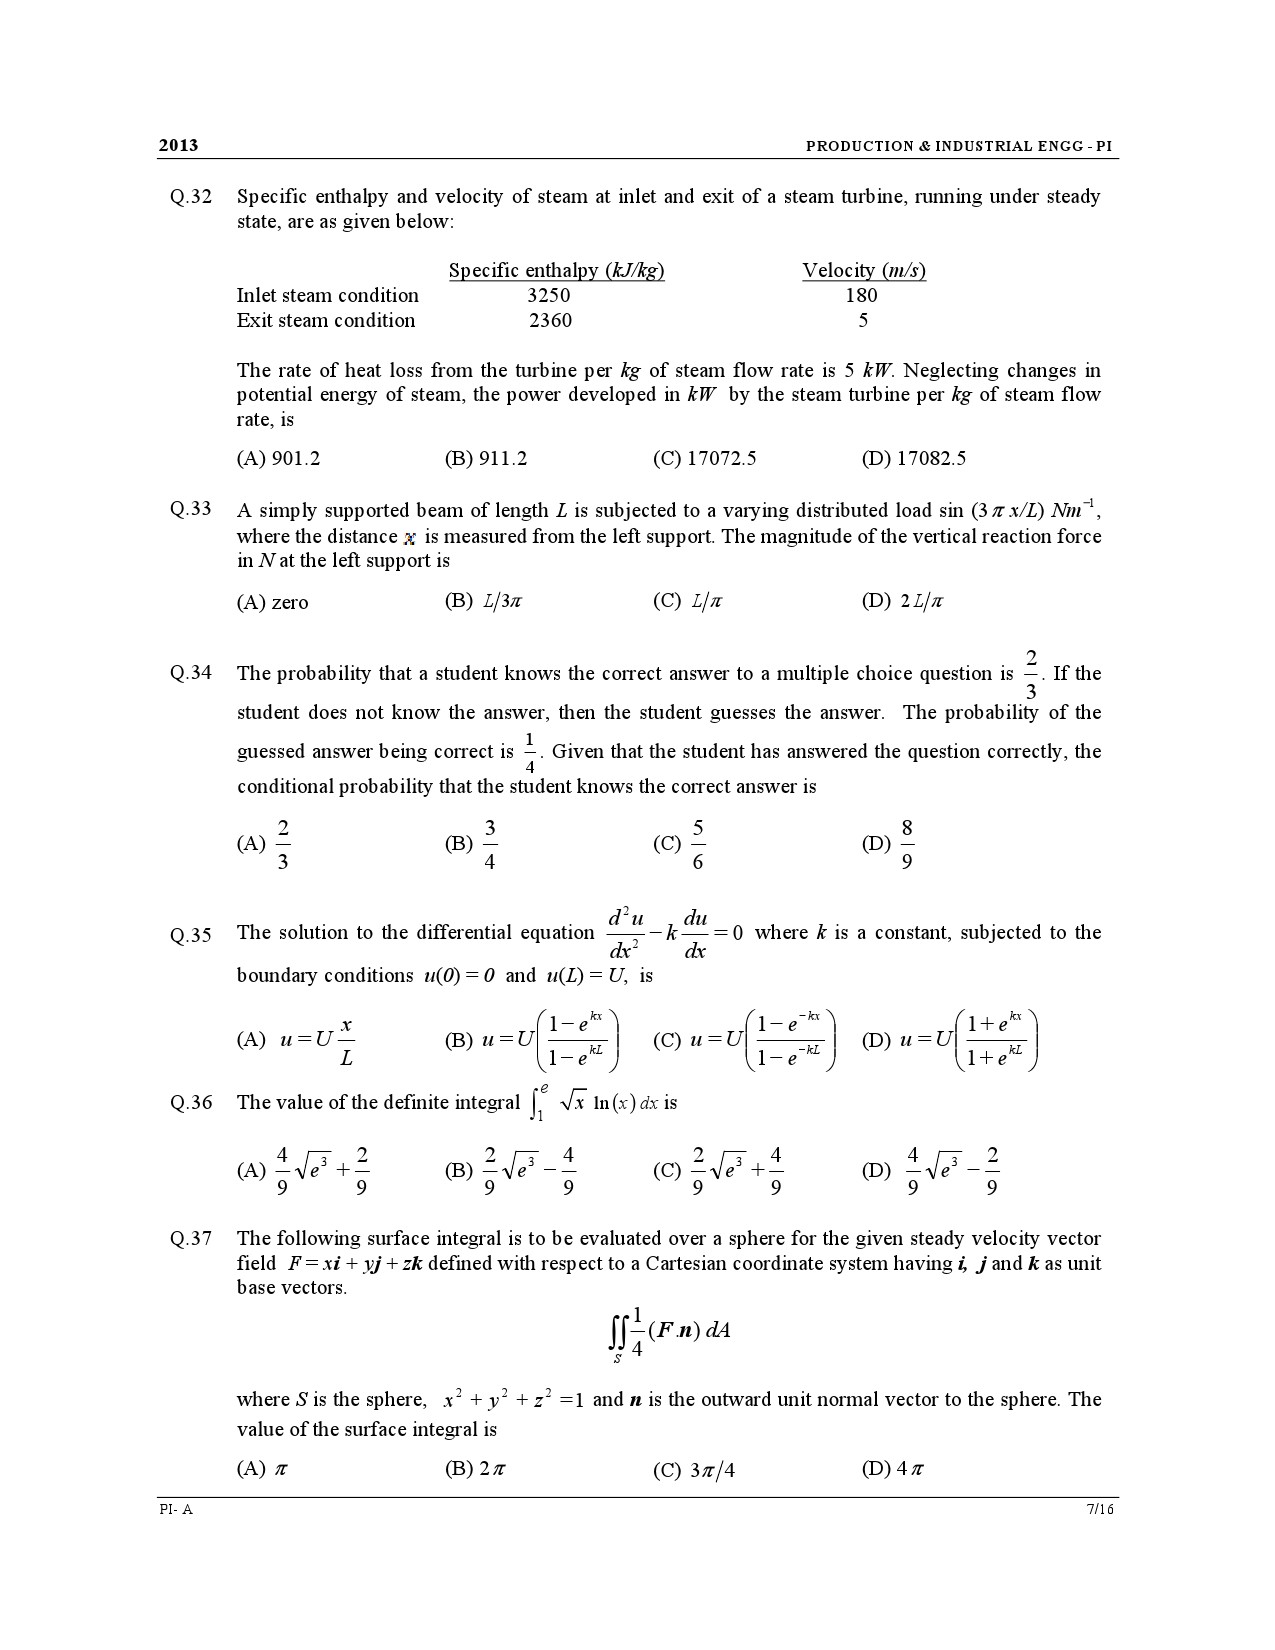 GATE Exam Question Paper 2013 Production and Industrial Engineering 7